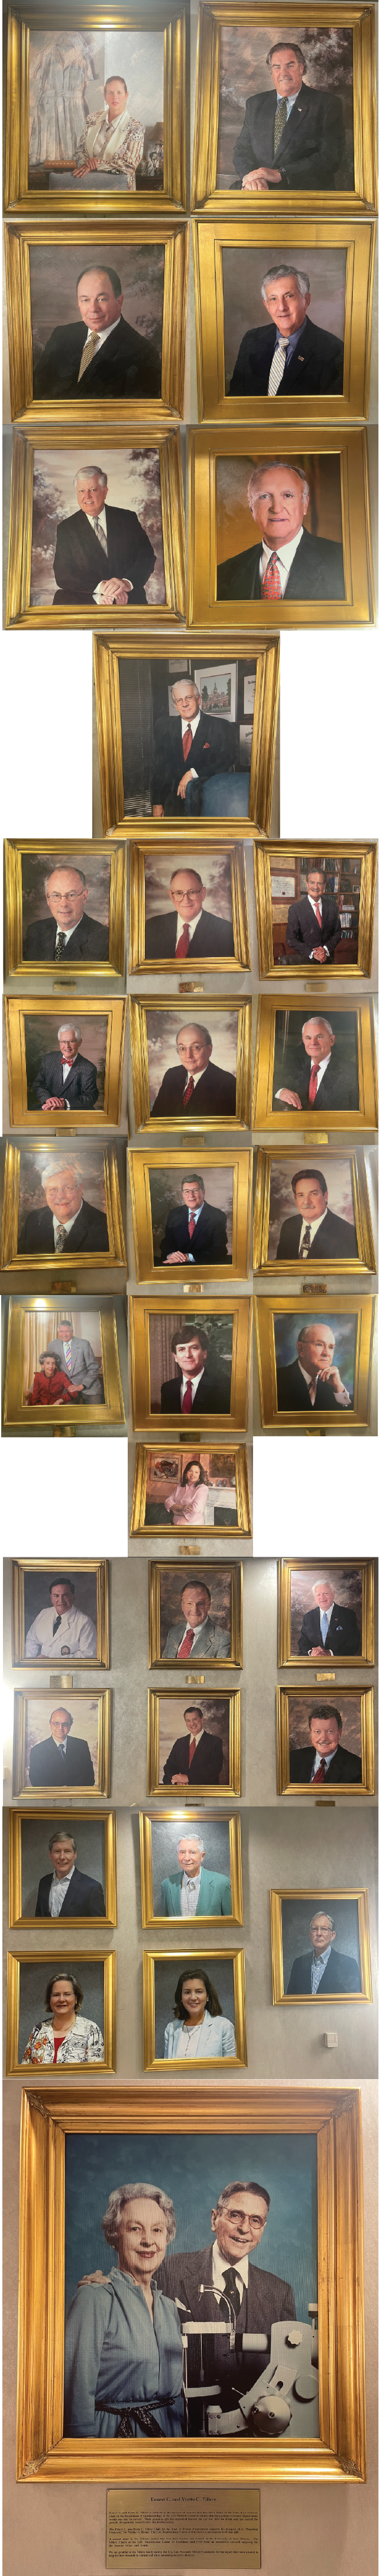 Portraits of Benefactors to the Neuroscience Center of Excellence